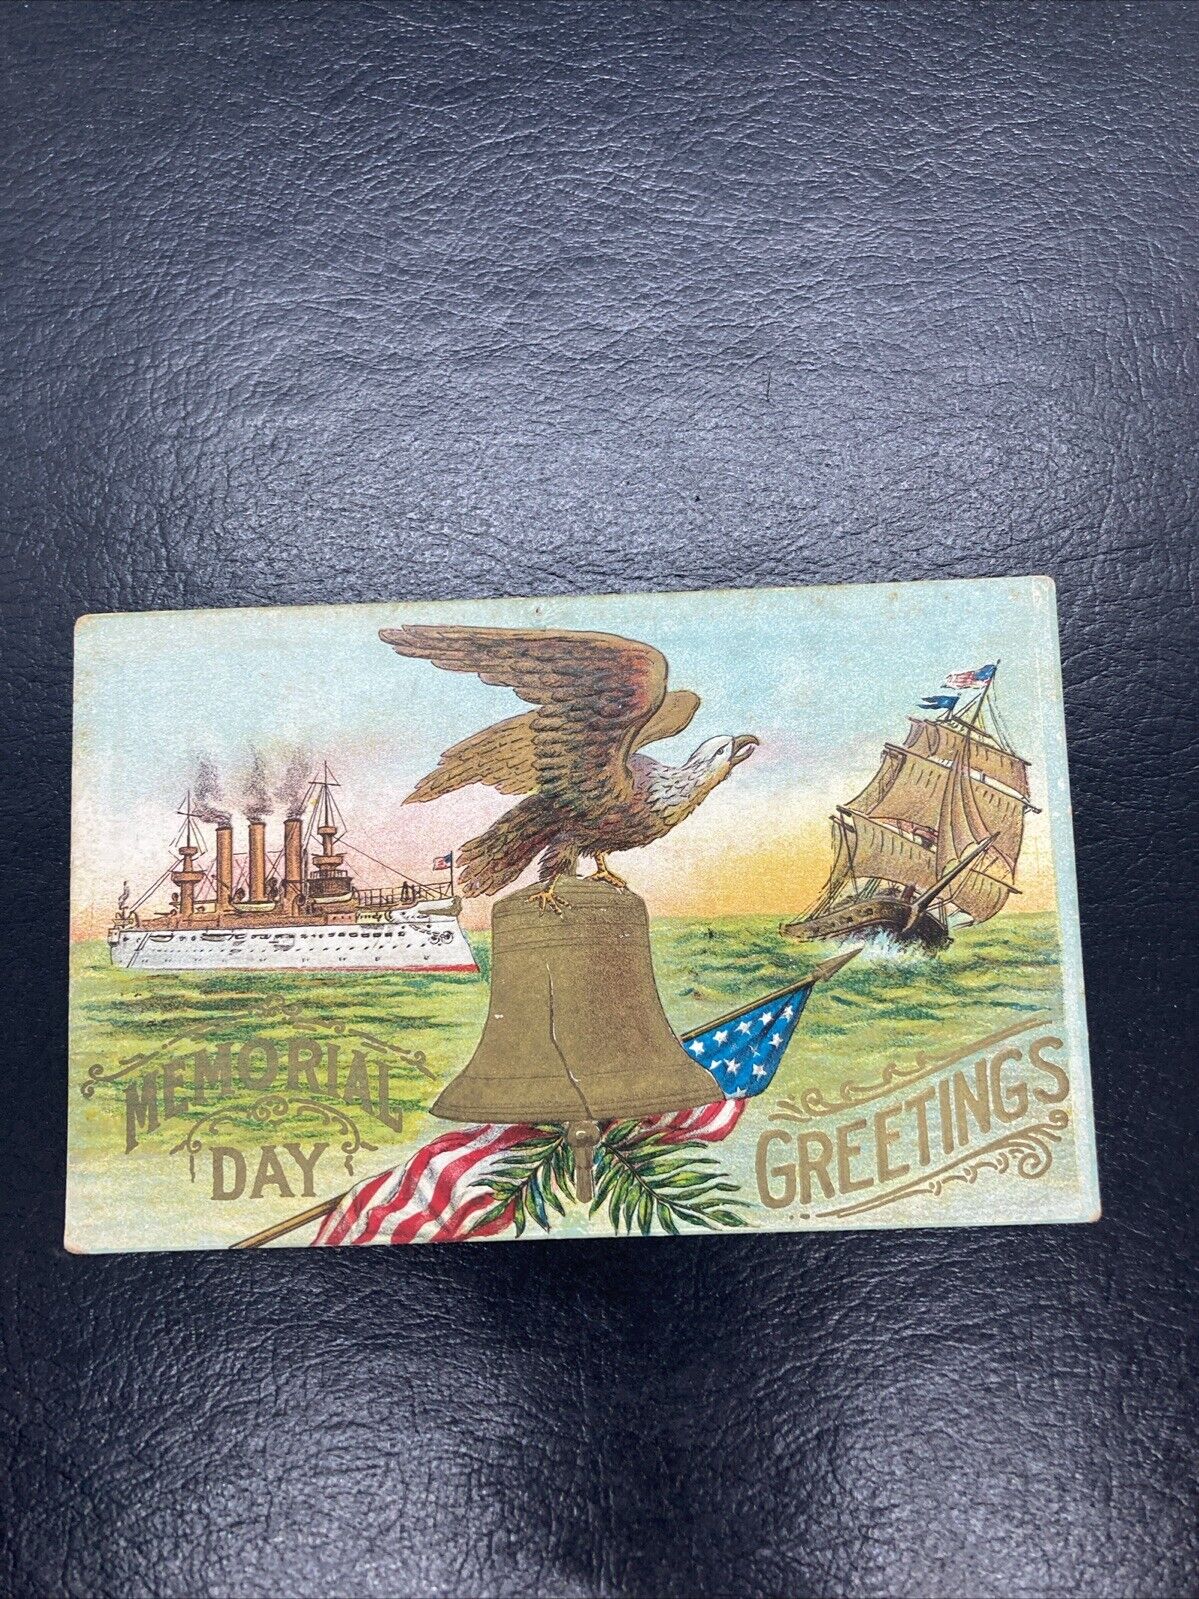 1909 Decoration Day Greetings Eagle Steamer Ship Boat Embossed Antique Postcard